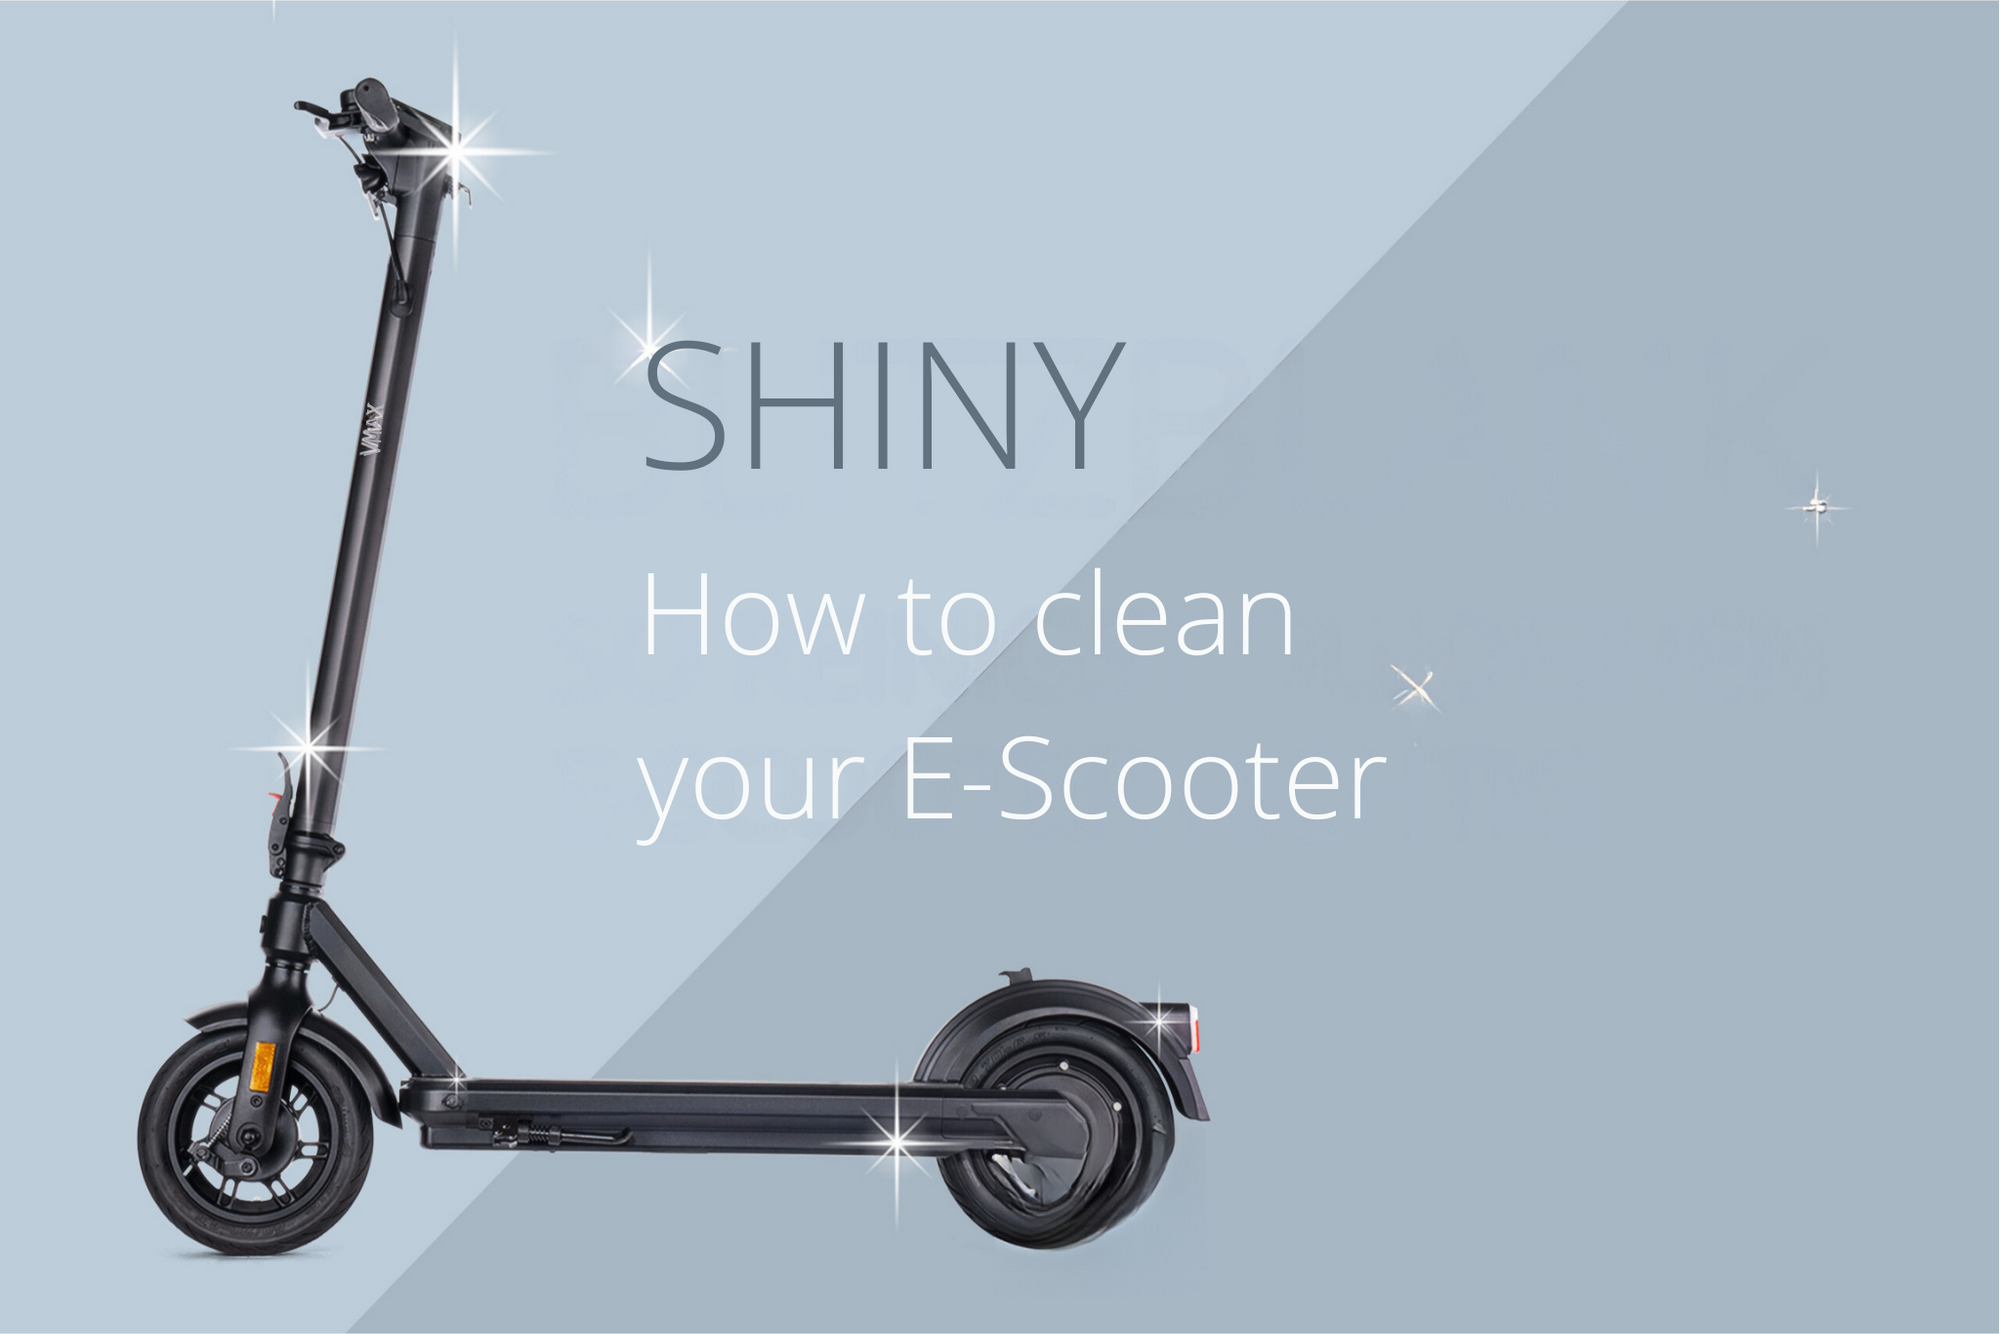 HOW DO I PROPERLY CLEAN MY E-SCOOTER?